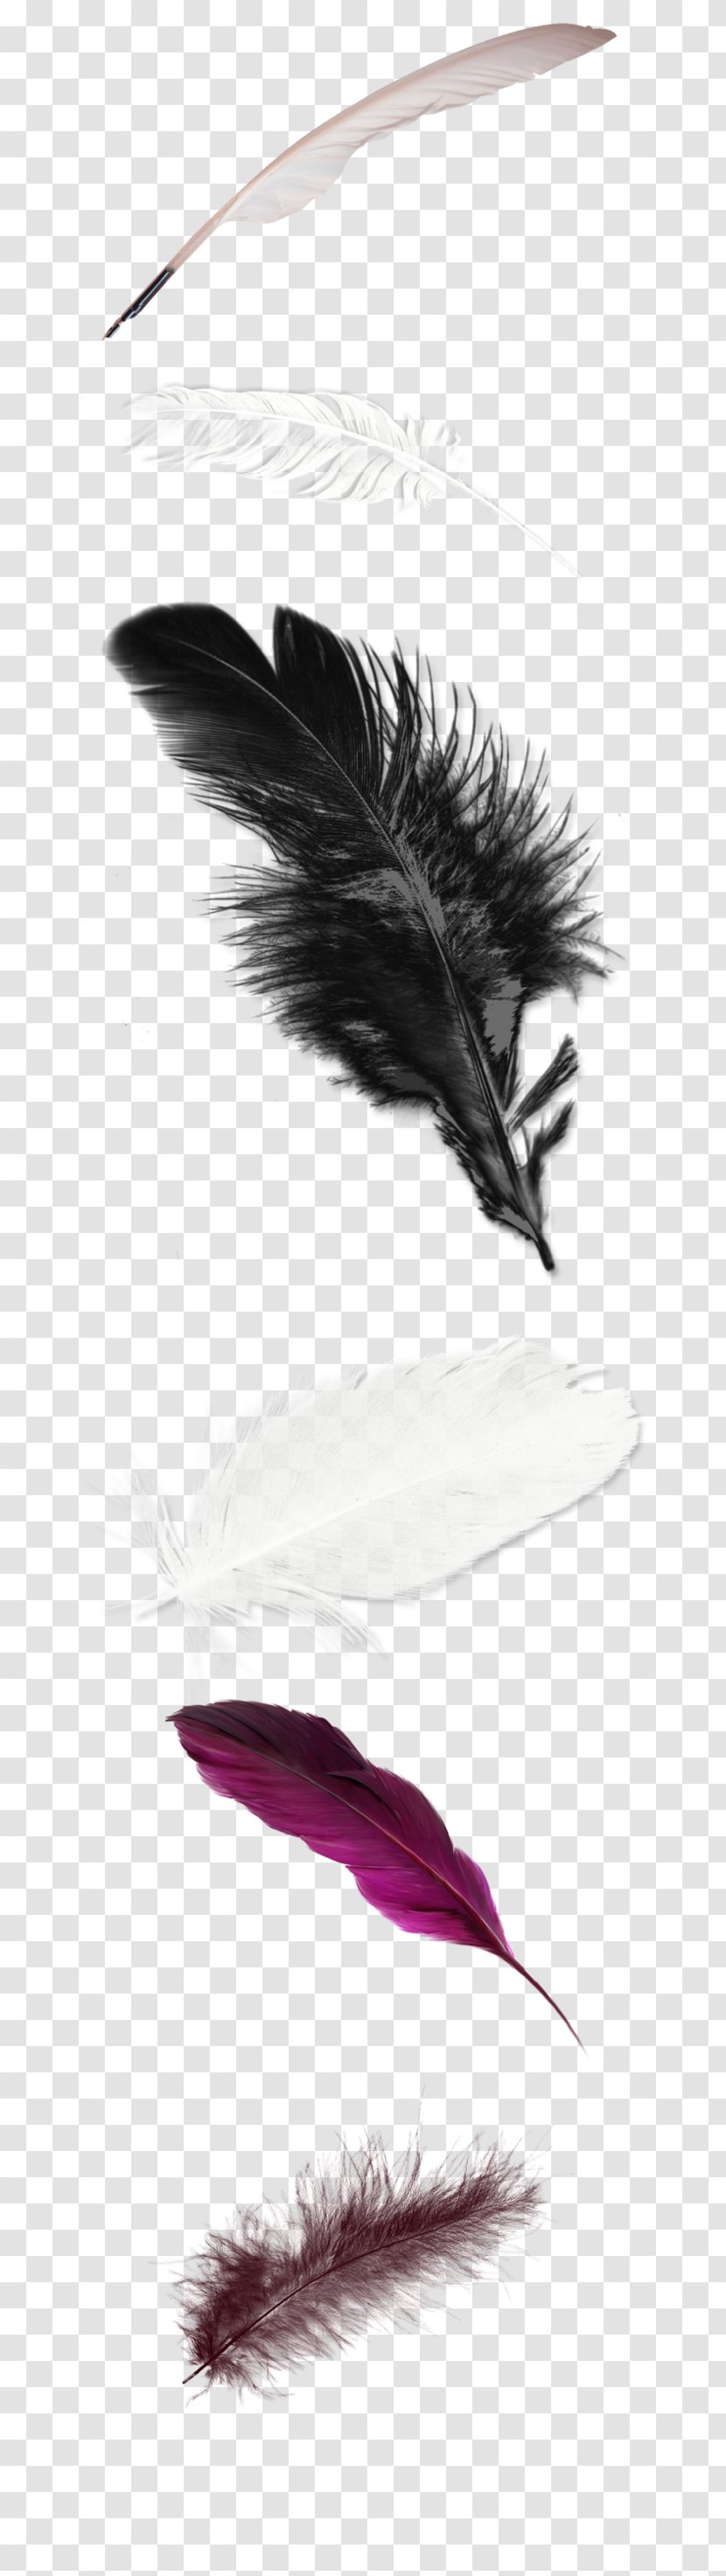 White Feather - Wing - Feathers Transparent PNG